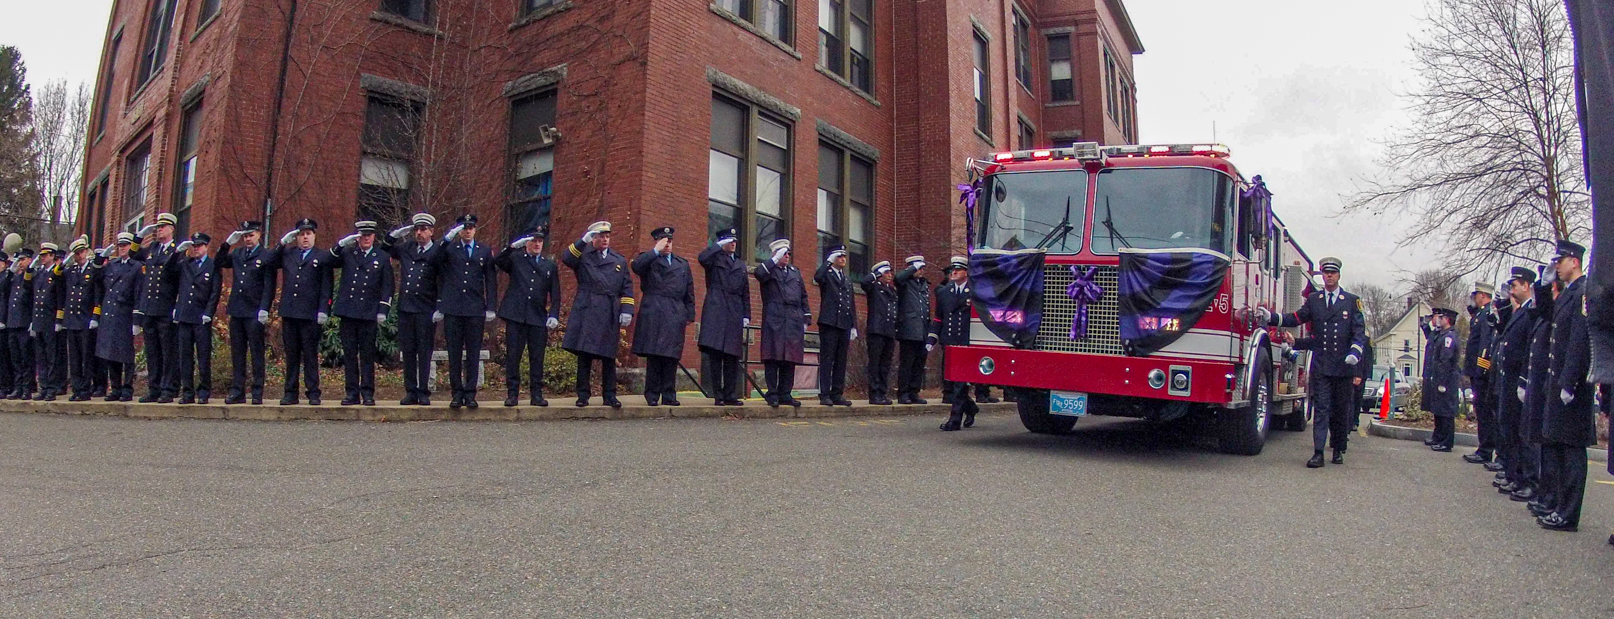 Funeral for Peabody MA Firefighter Jim Rice